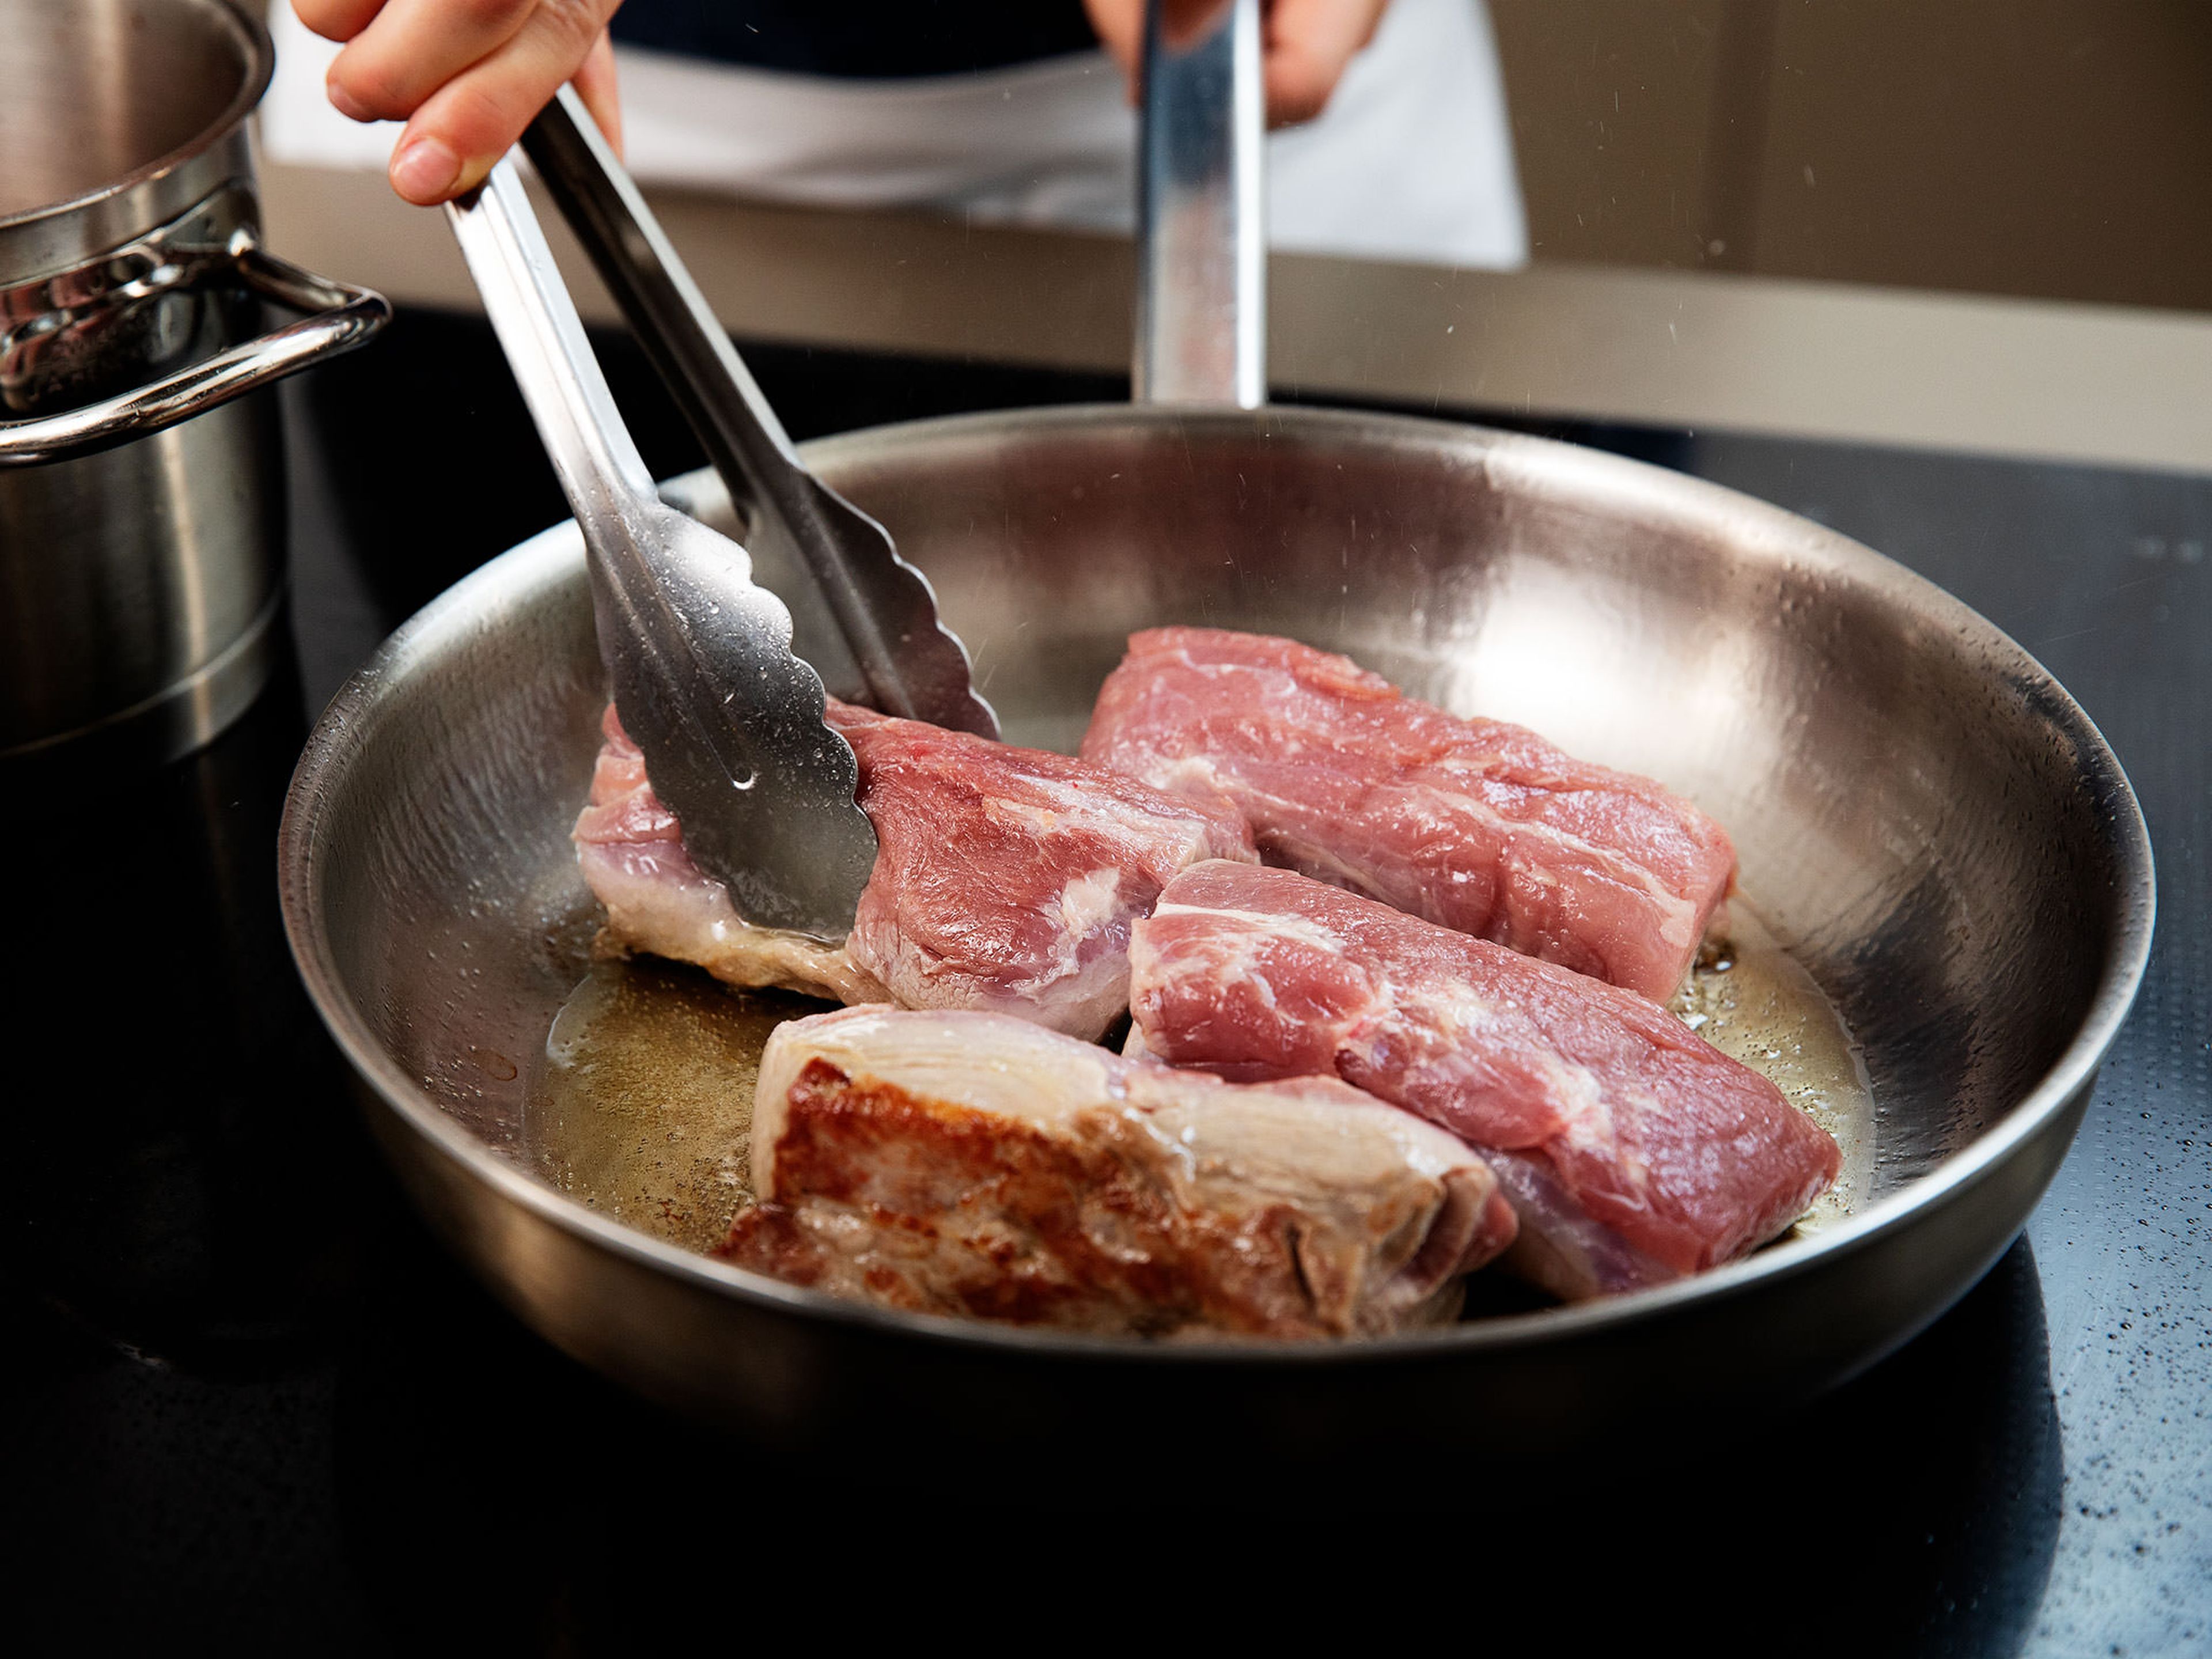 Preheat the oven to 160°C/320°F. Salt pork tenderloin on both sides. Heat vegetable oil in a frying pan set over medium-high heat and sear pork on both sides for approx. 2 – 3 min.